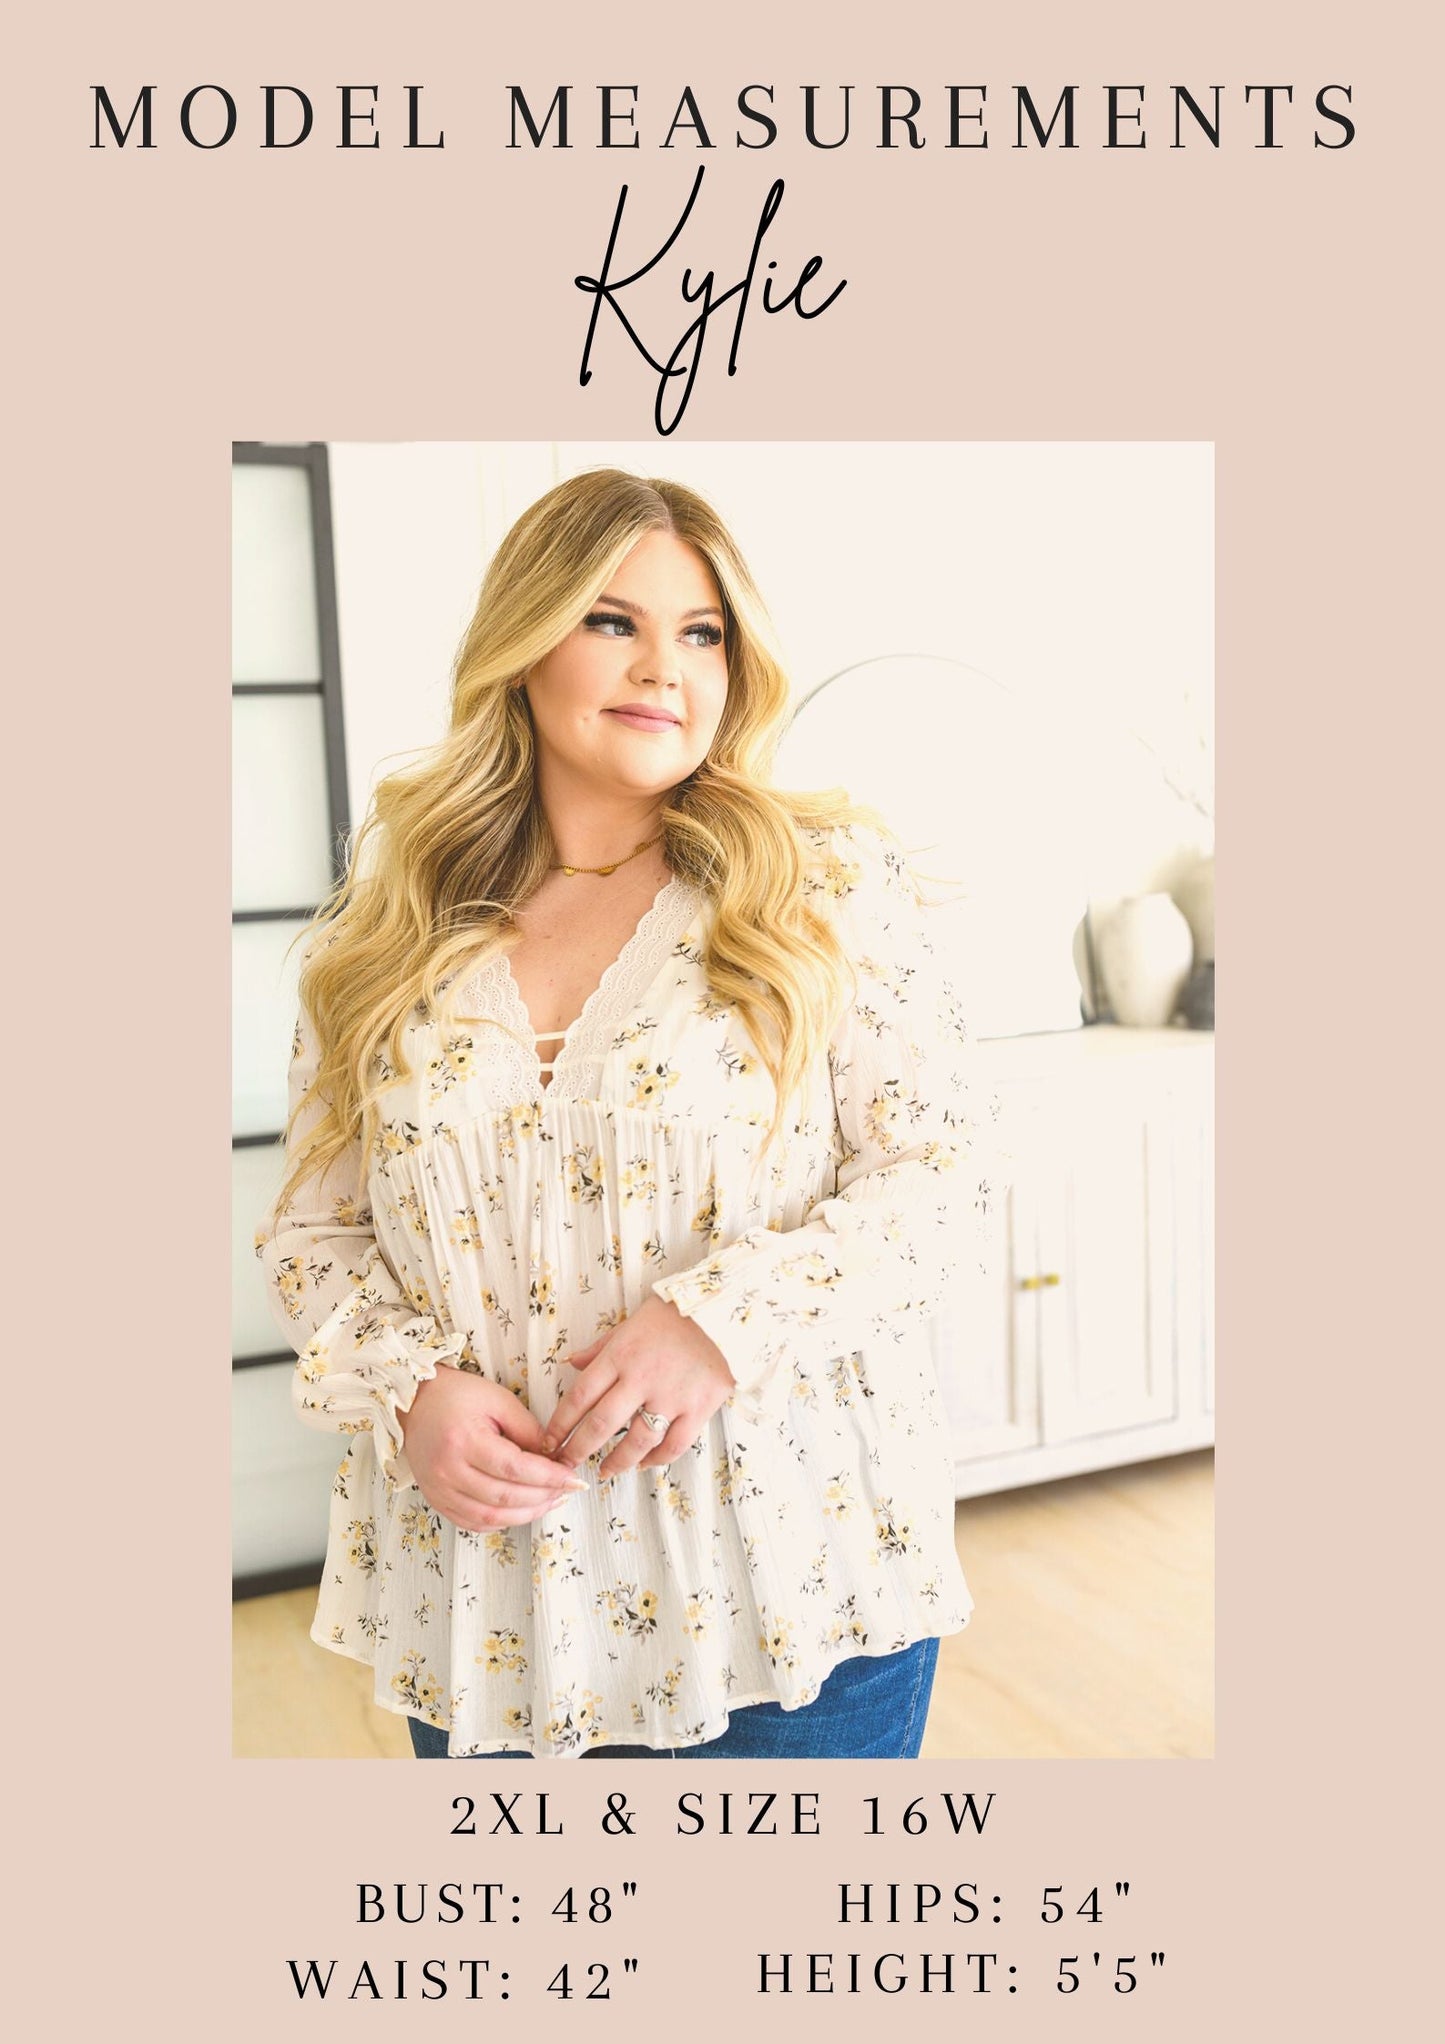 Chasing Butterflies Babydoll Blouse (Online Exclusive)